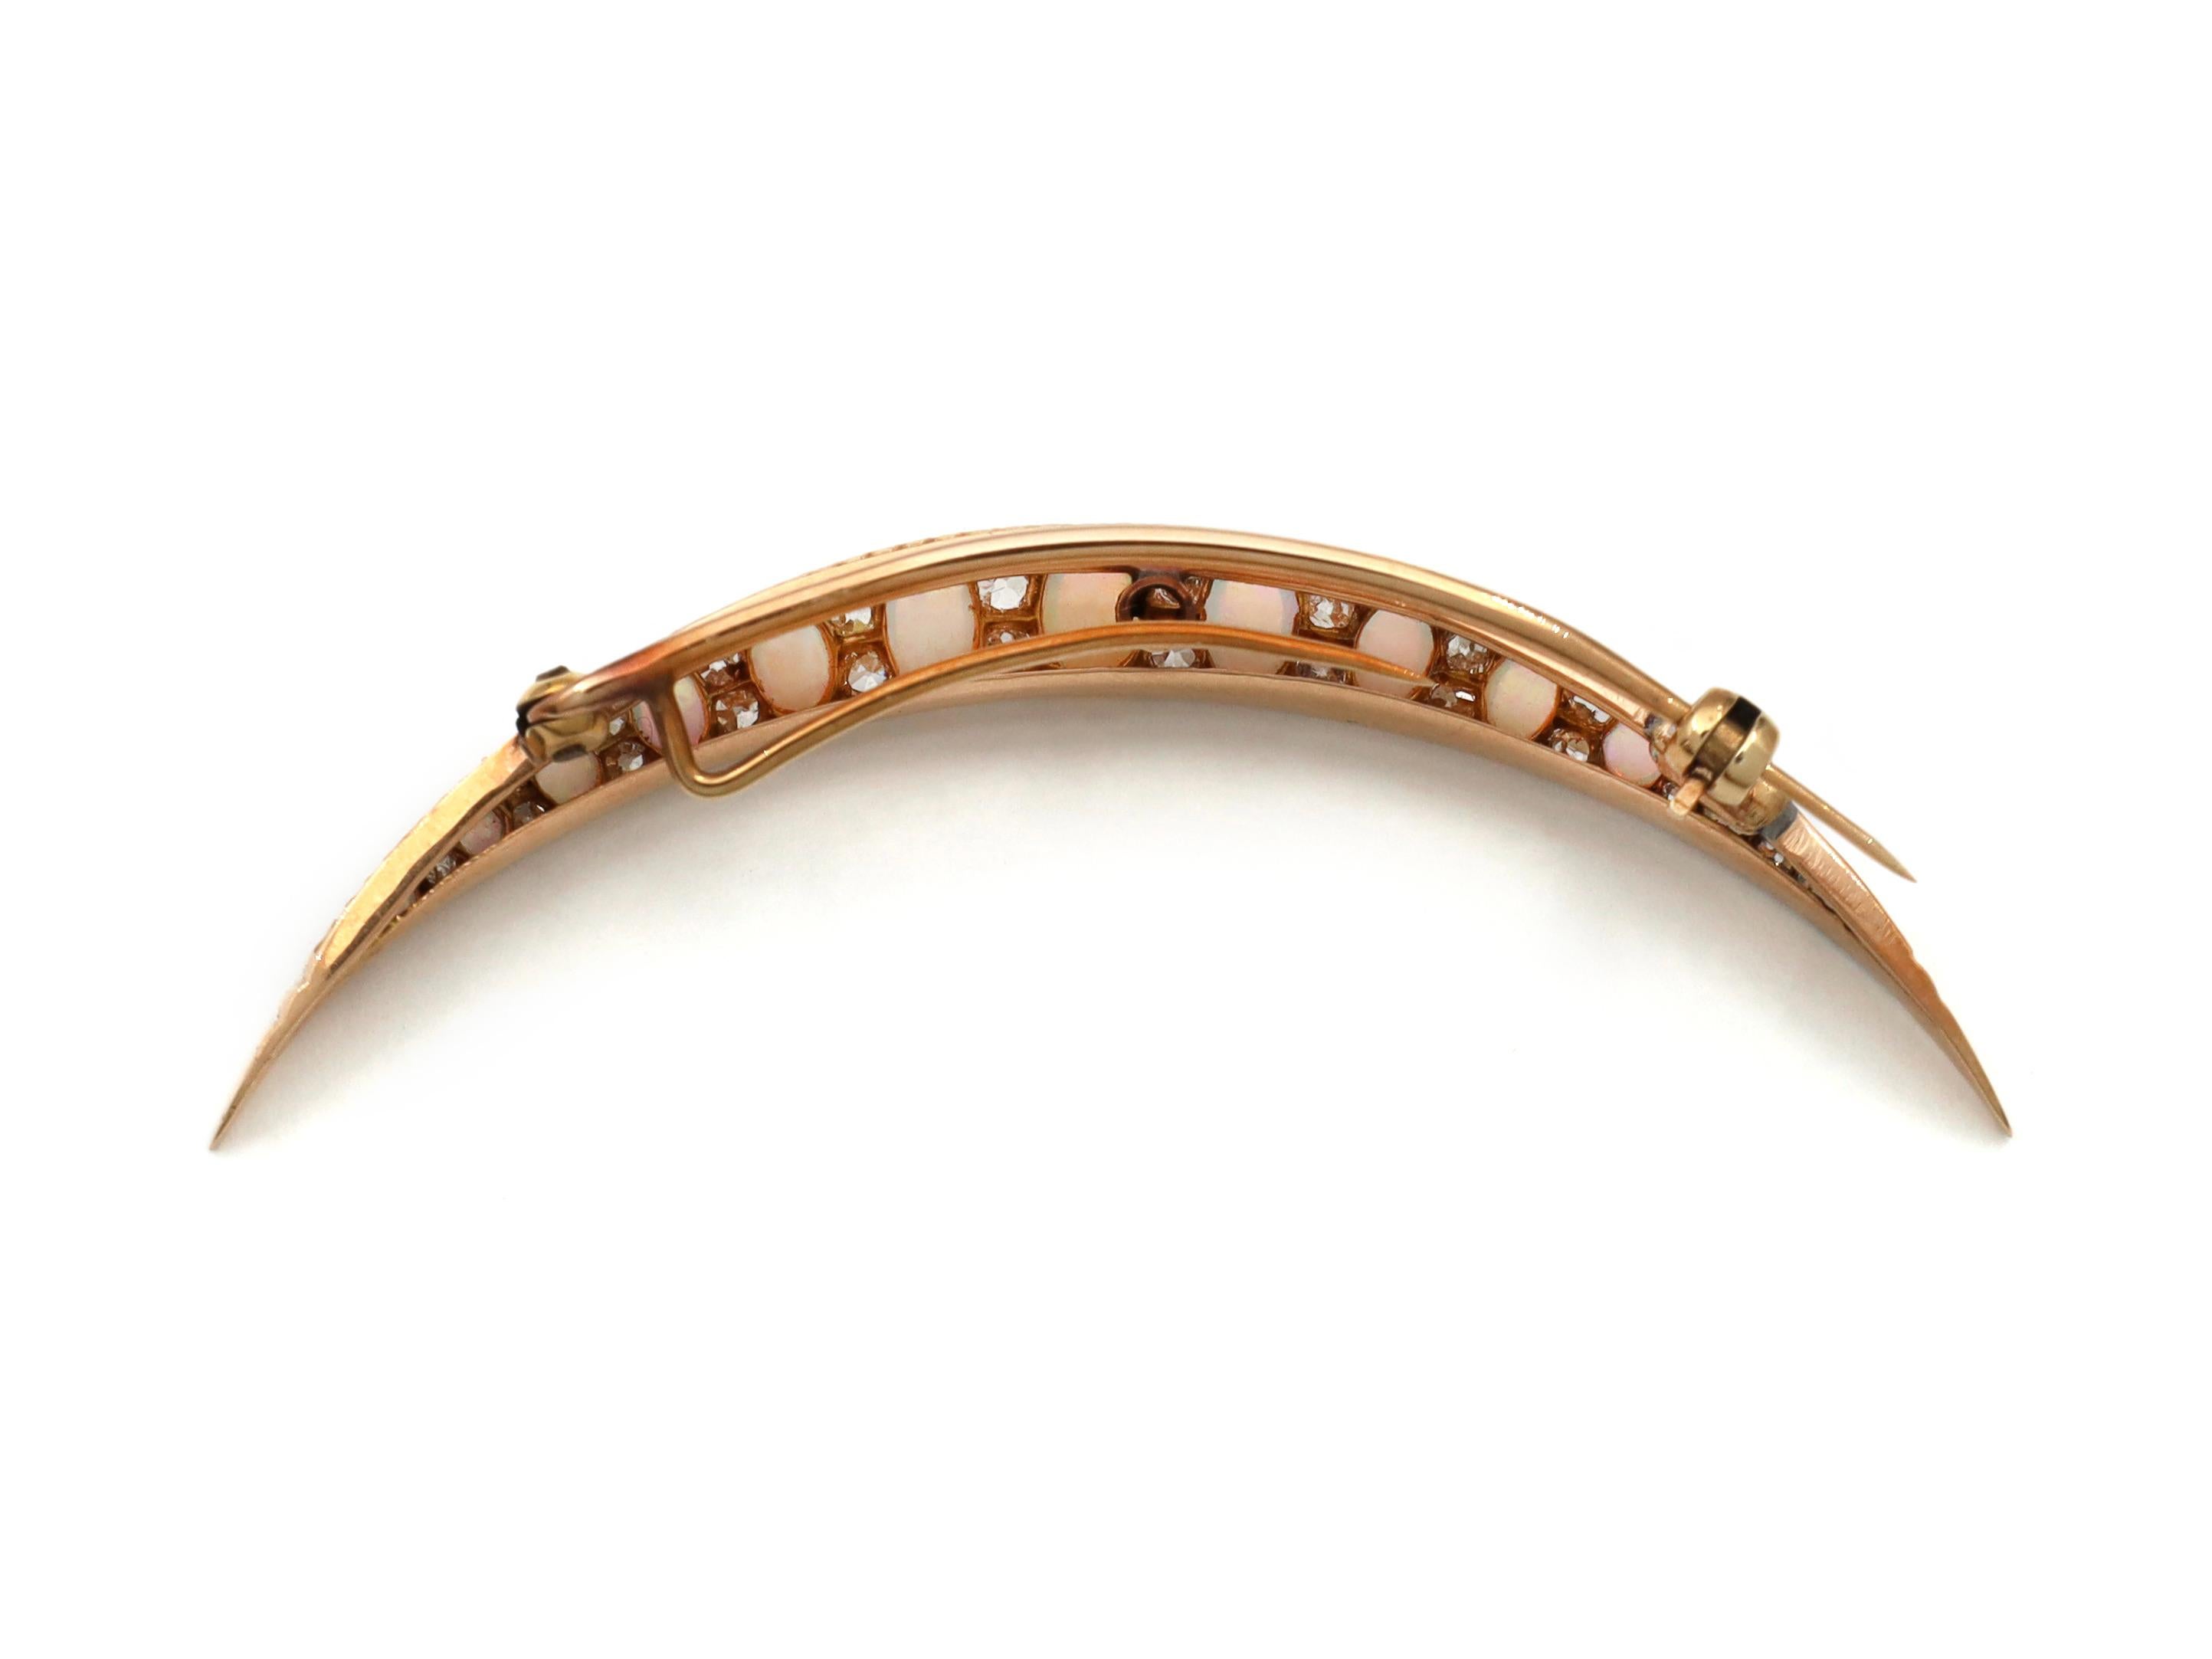 Cabochon Victorian opal and diamond crescent moon brooch in yellow gold